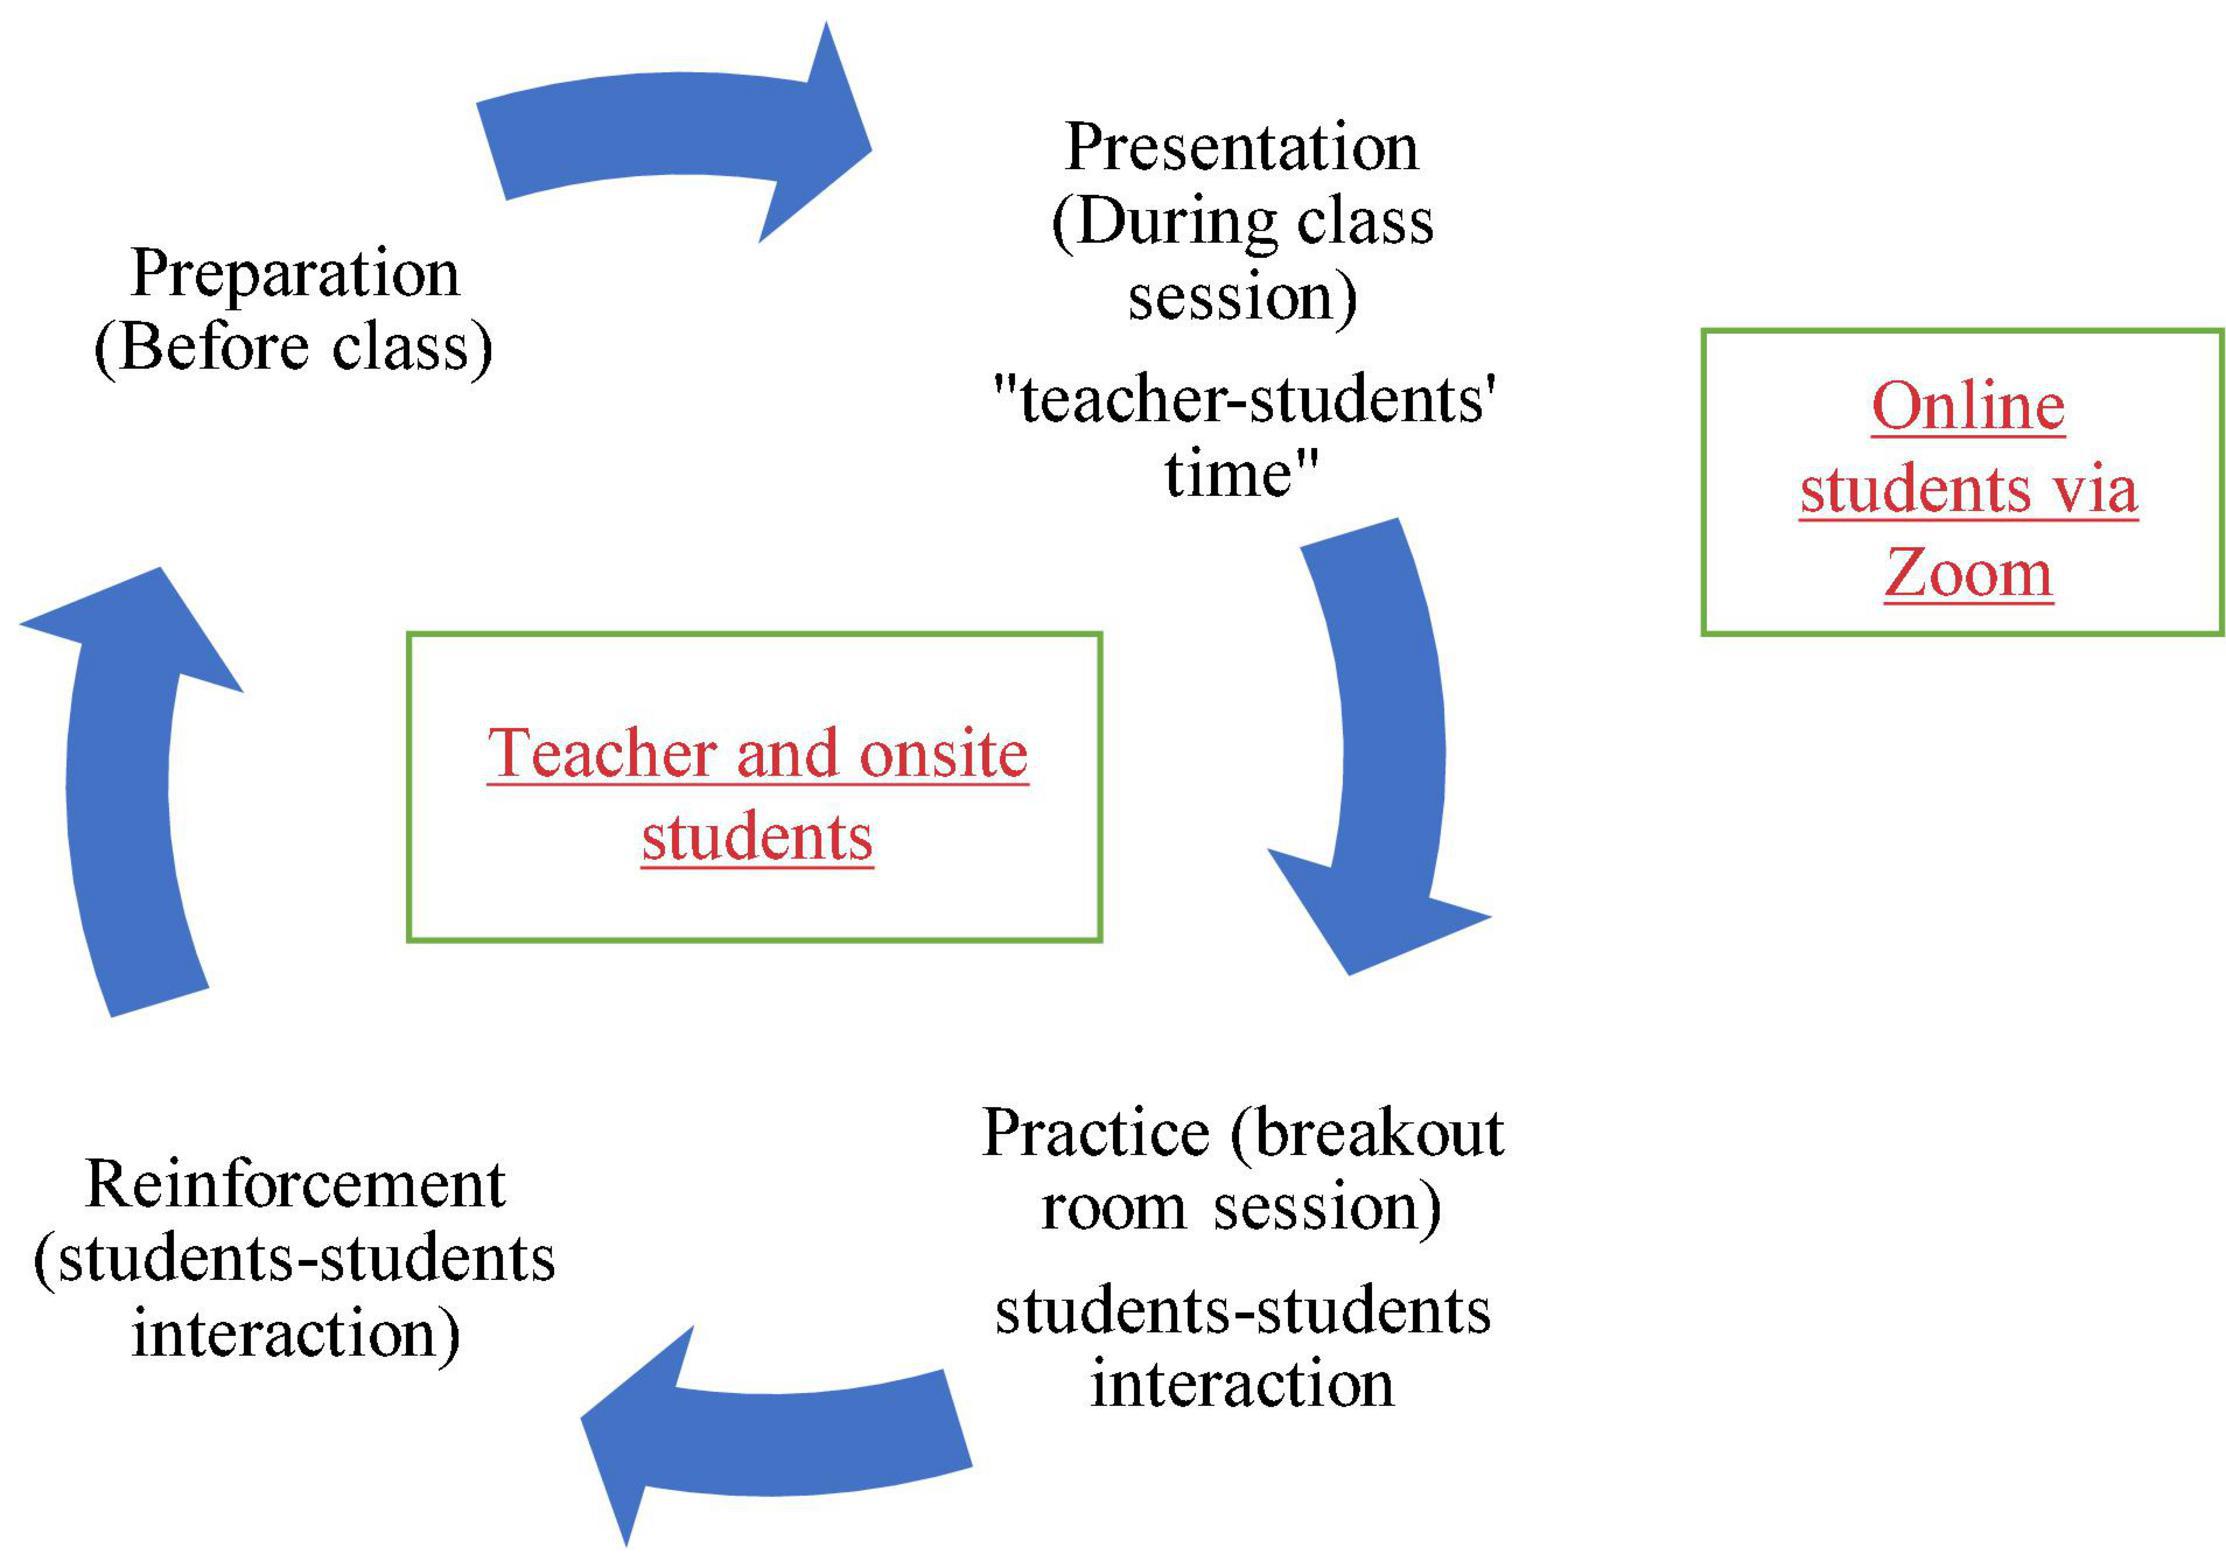 Tools for Remote Teaching During COVID-19 Outbreak - The Keyword